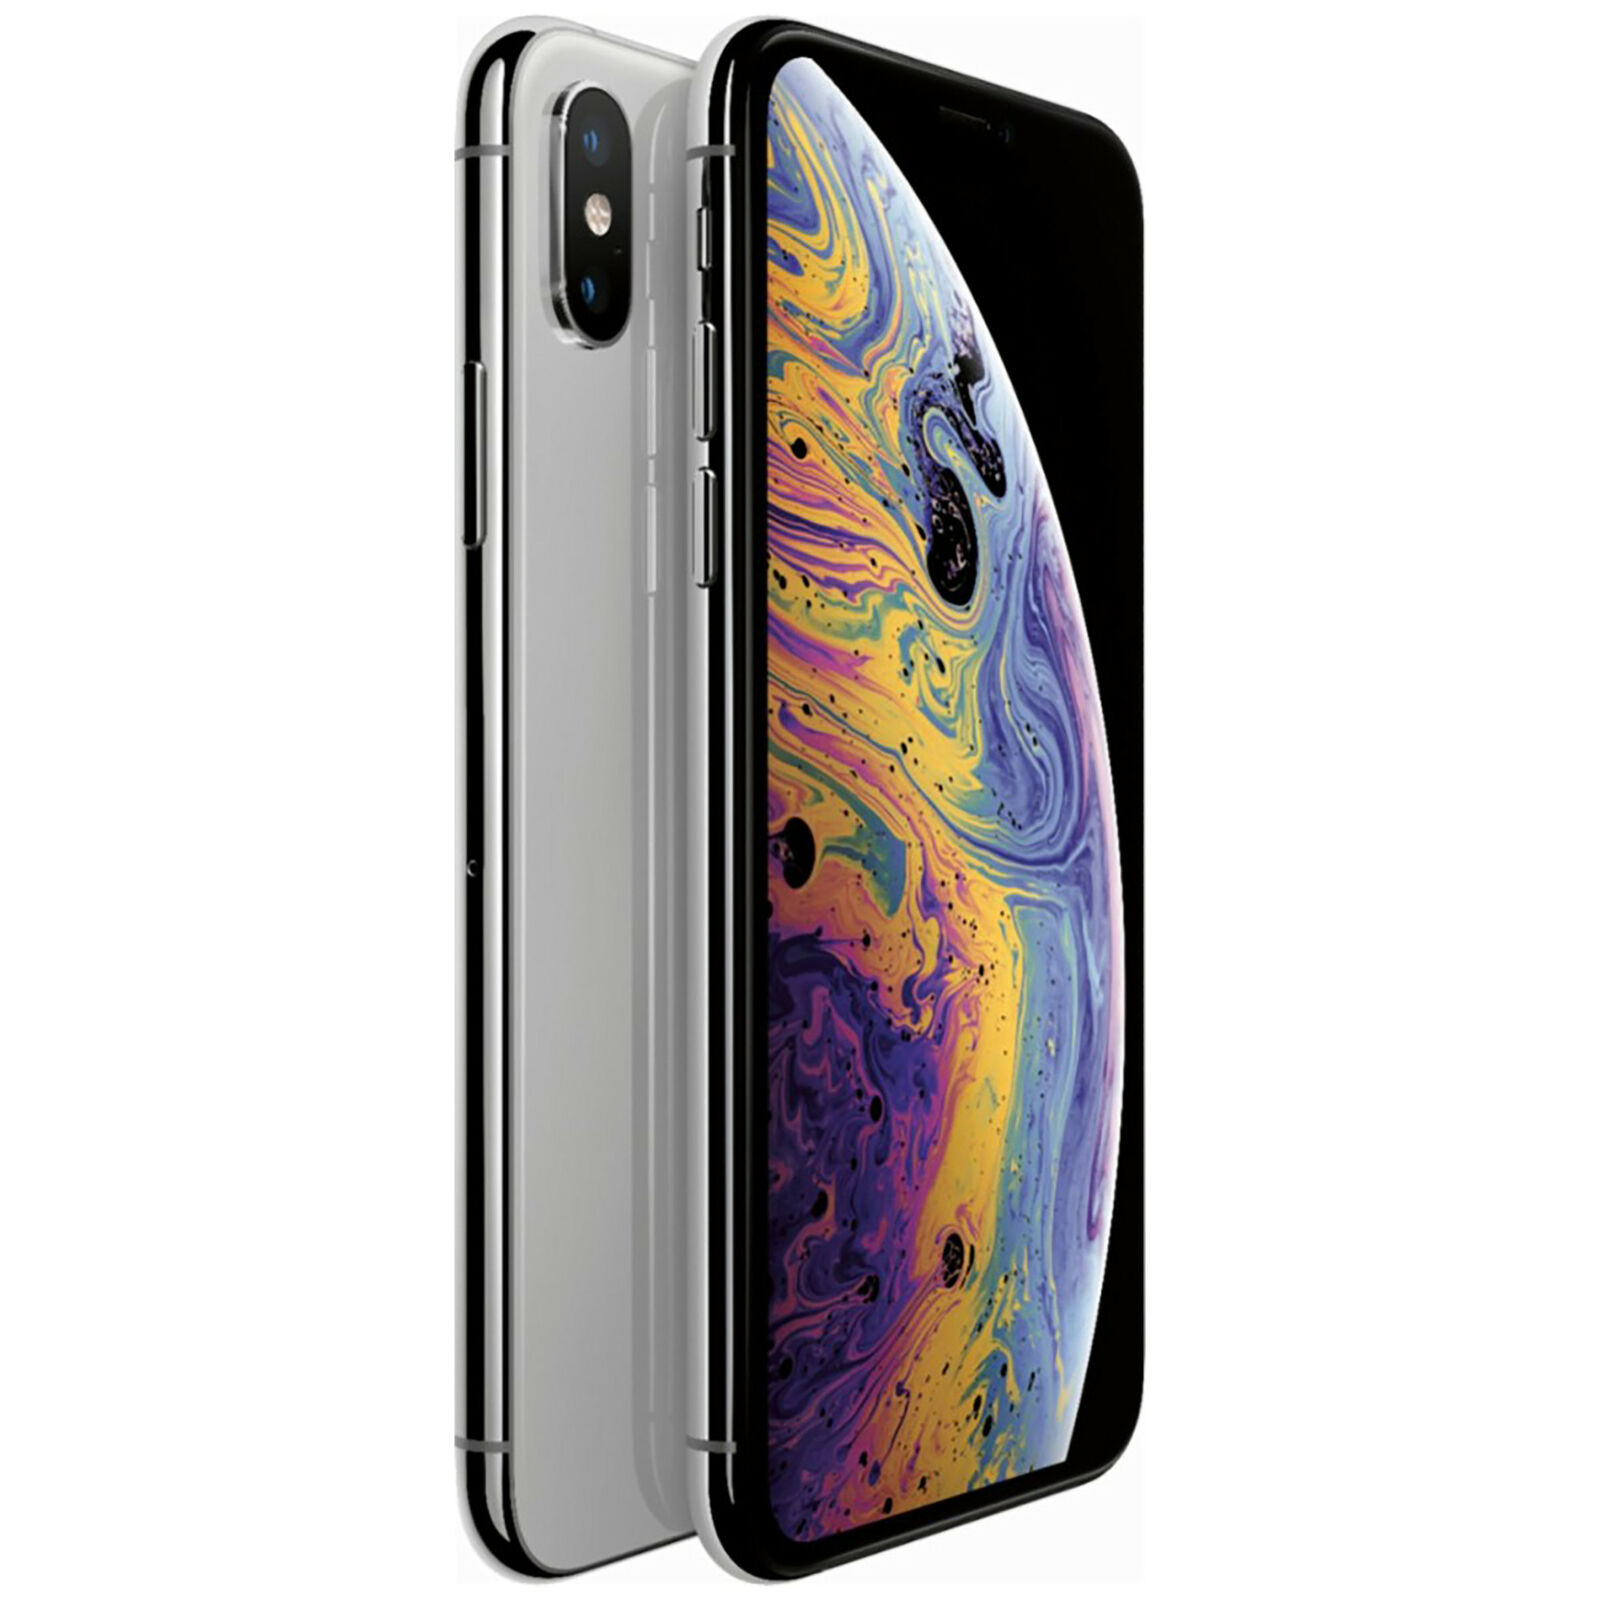 The Price Of Apple iPhone XS 256GB Fully Unlocked – Silver – Grade C | Apple iPhone